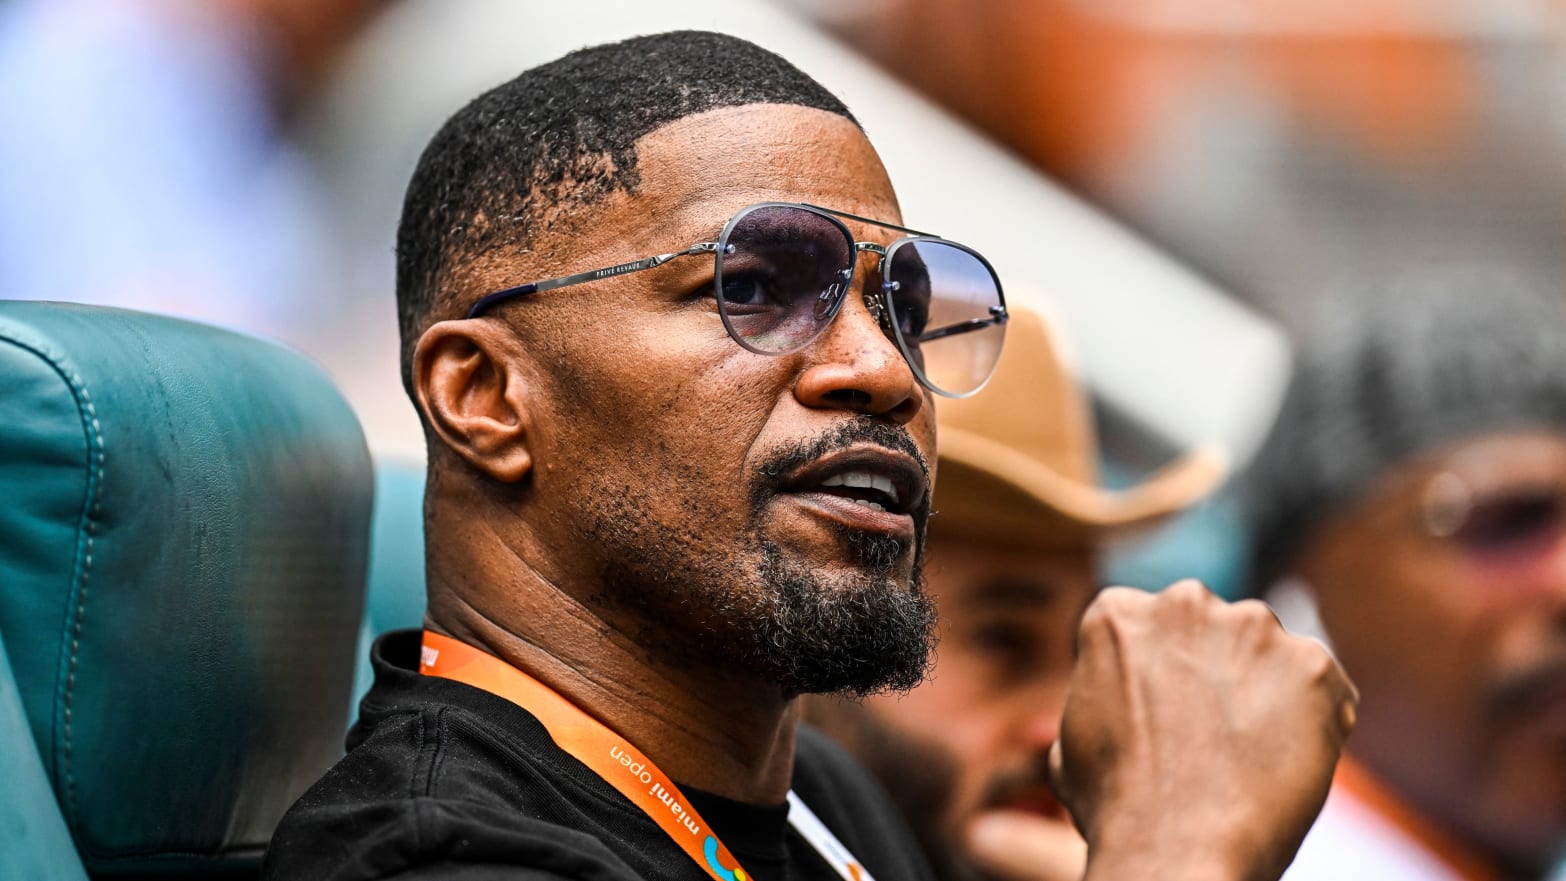 Jamie Foxx Gets Emotional In First Appearance Since Health Scare